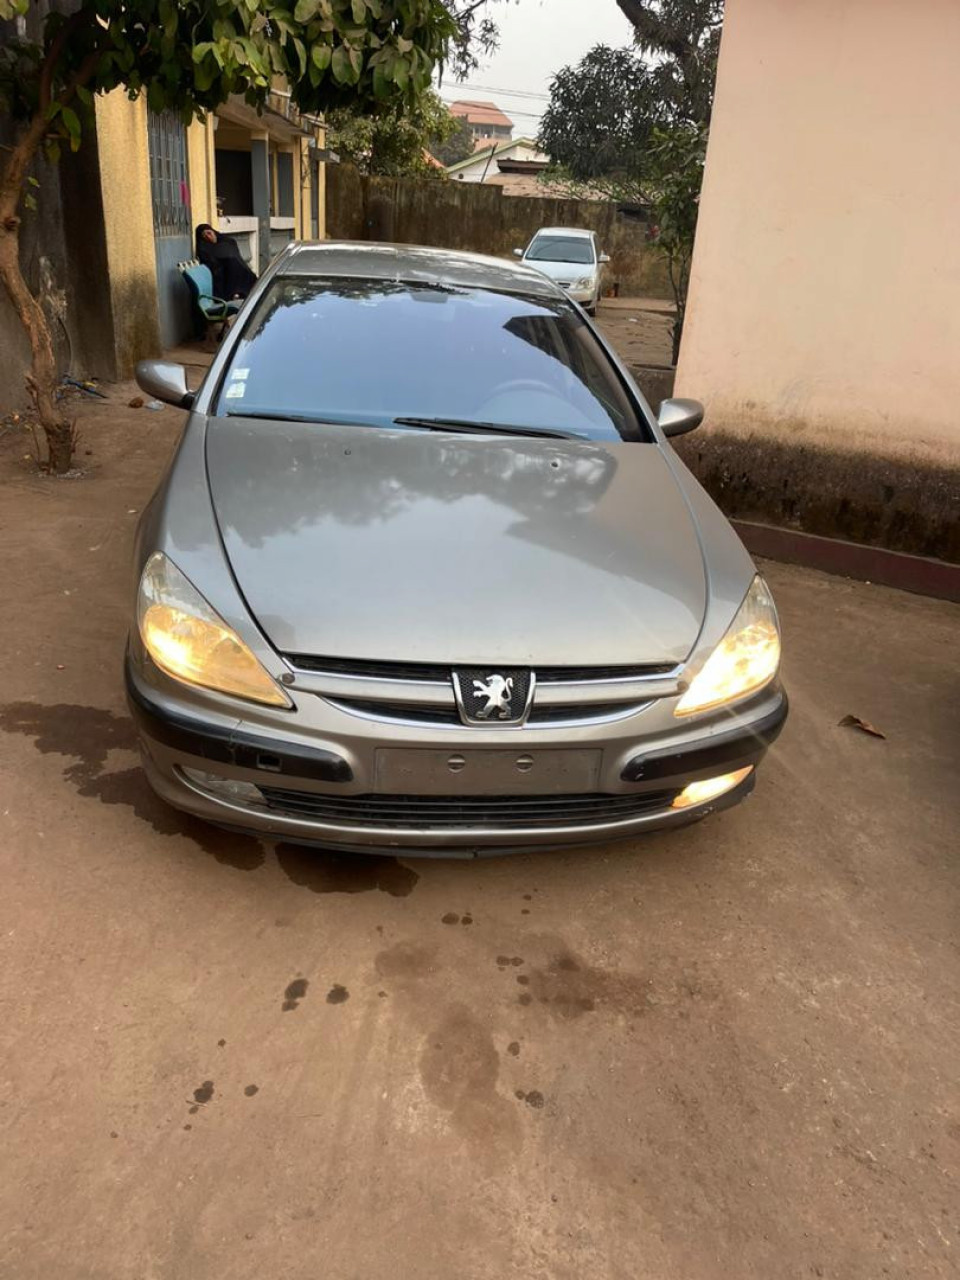 Peugeot 607, Voitures, Conakry